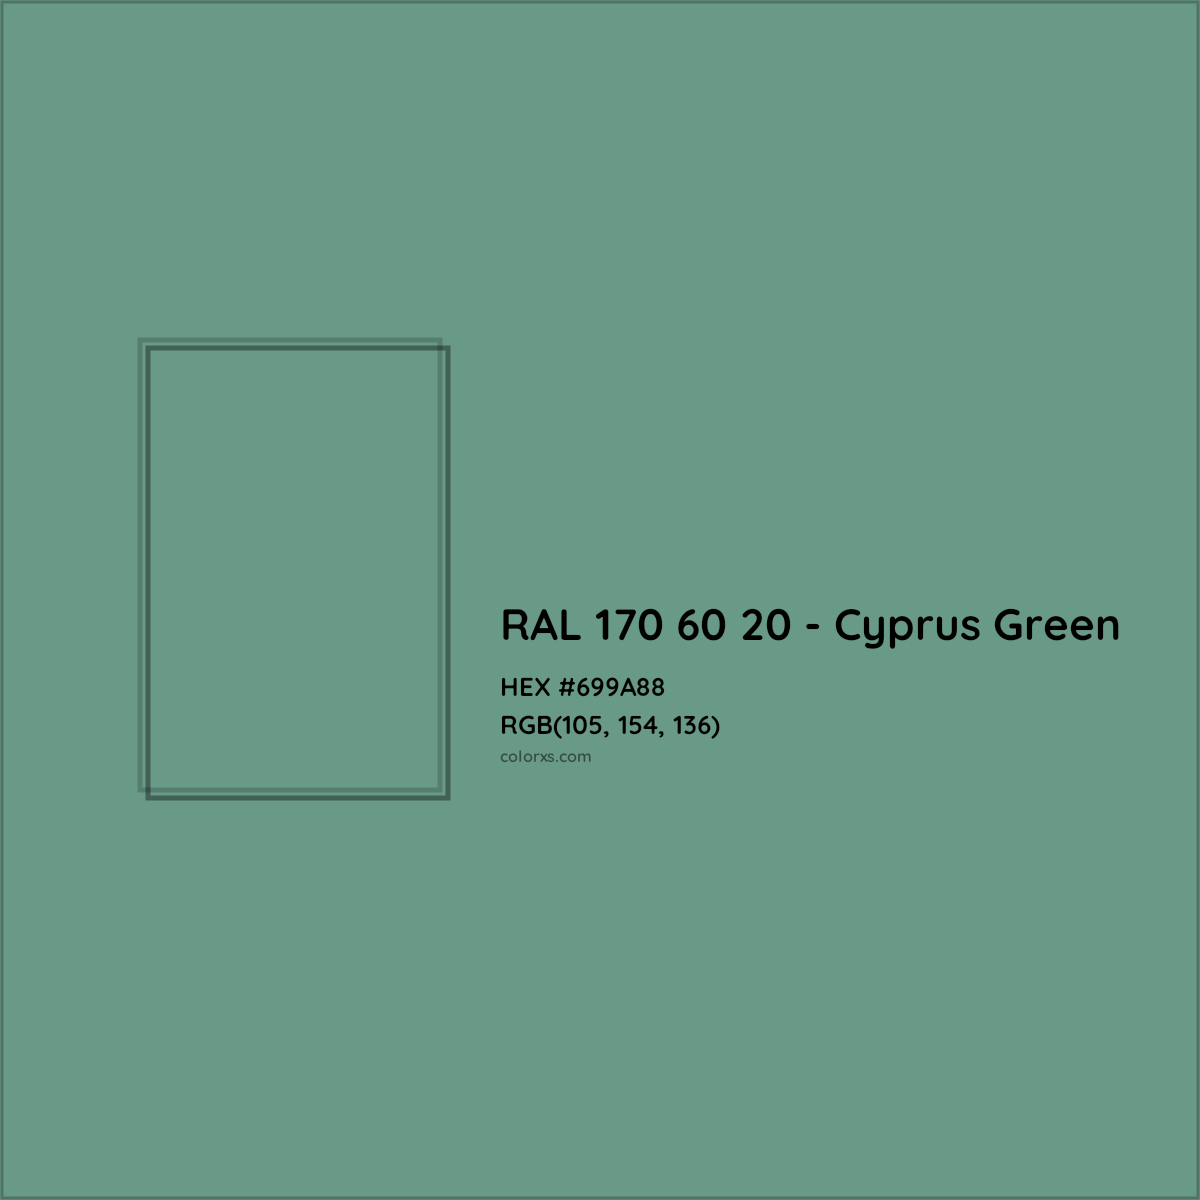 HEX #699A88 RAL 170 60 20 - Cyprus Green CMS RAL Design - Color Code